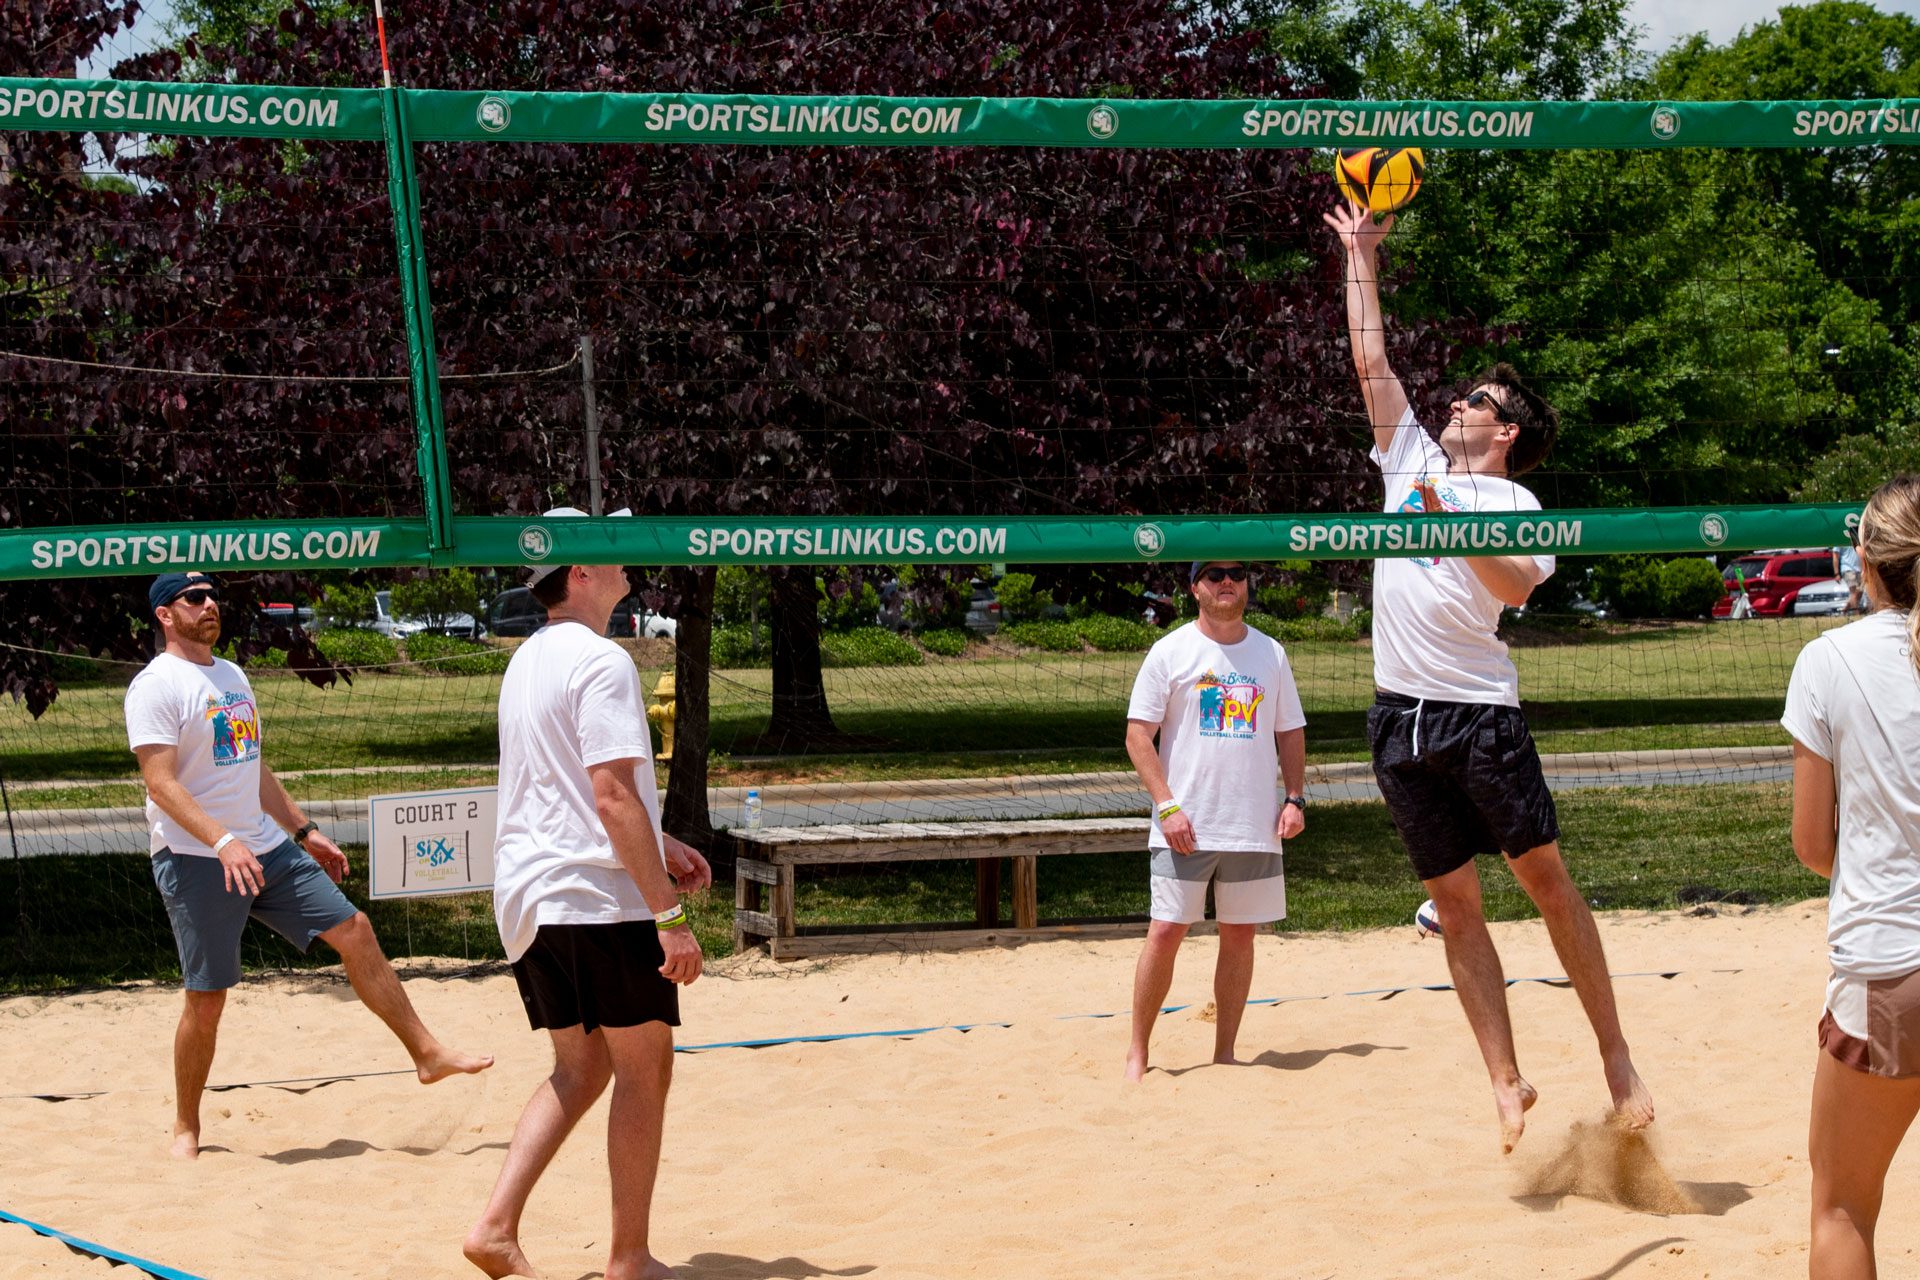 volleyball scene with one player jumping for ball on sand court and others watching